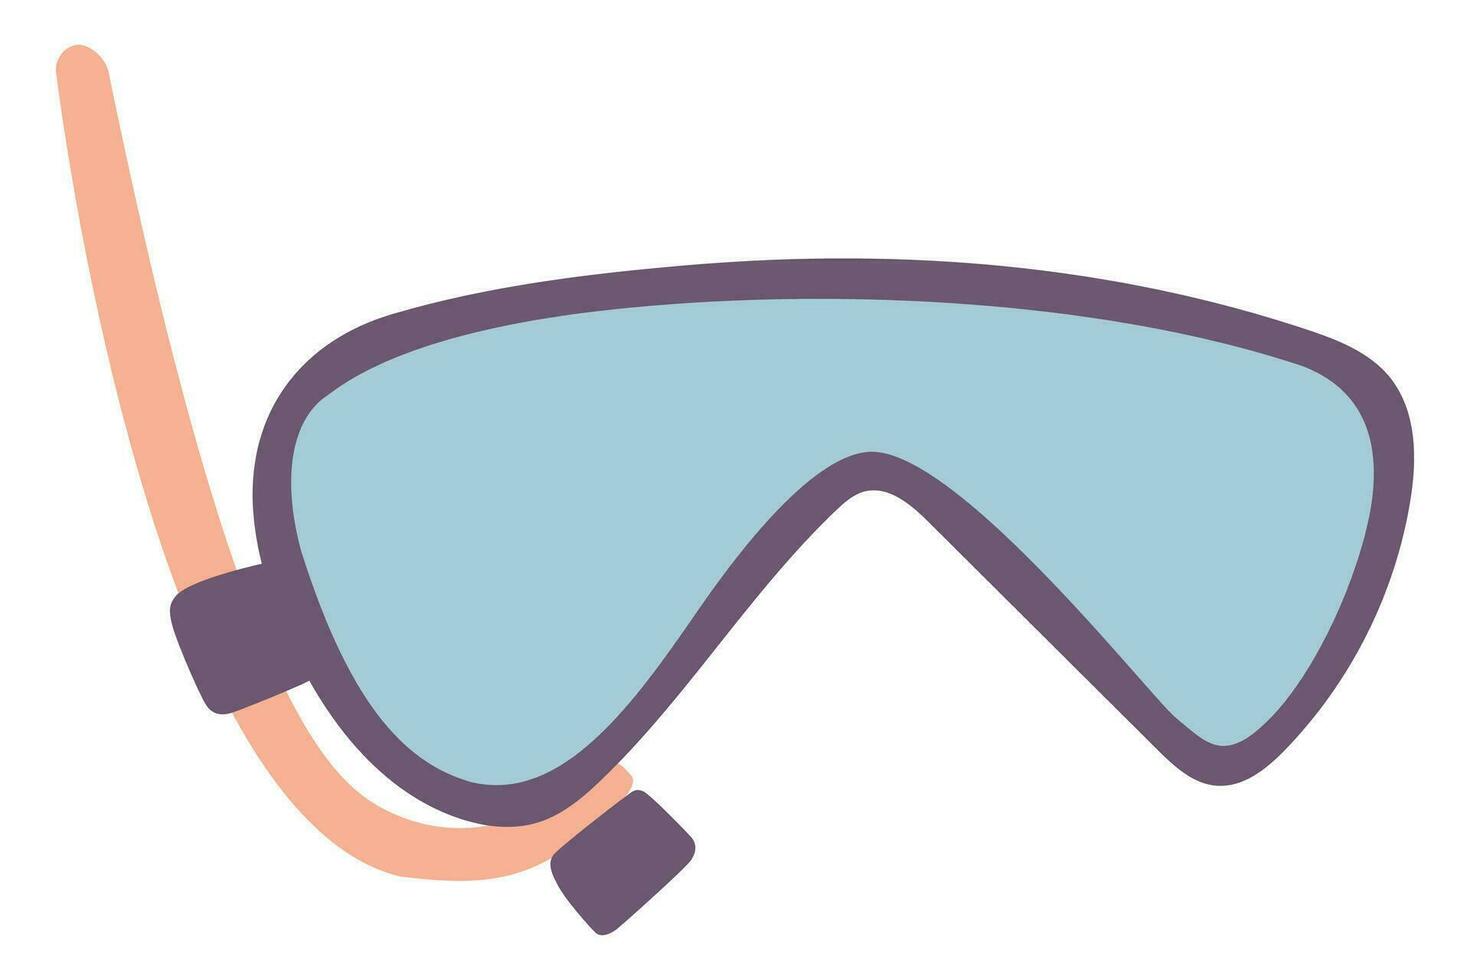 Diving mask with snorkel flat icon, flat vector illustration.